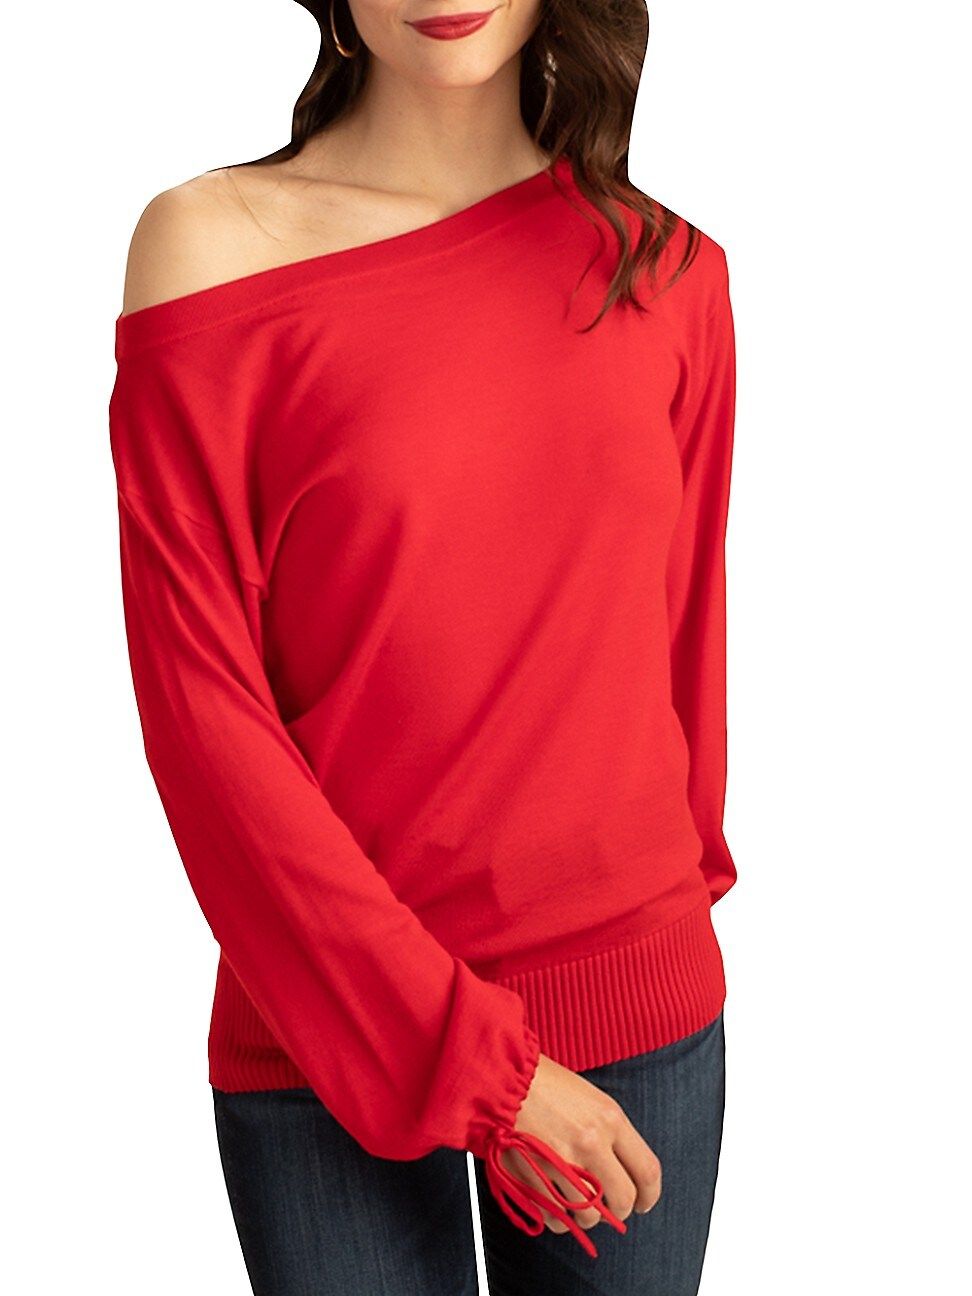 Trina Turk Zsa Zsa Off-The-Shoulder Sweater | Saks Fifth Avenue